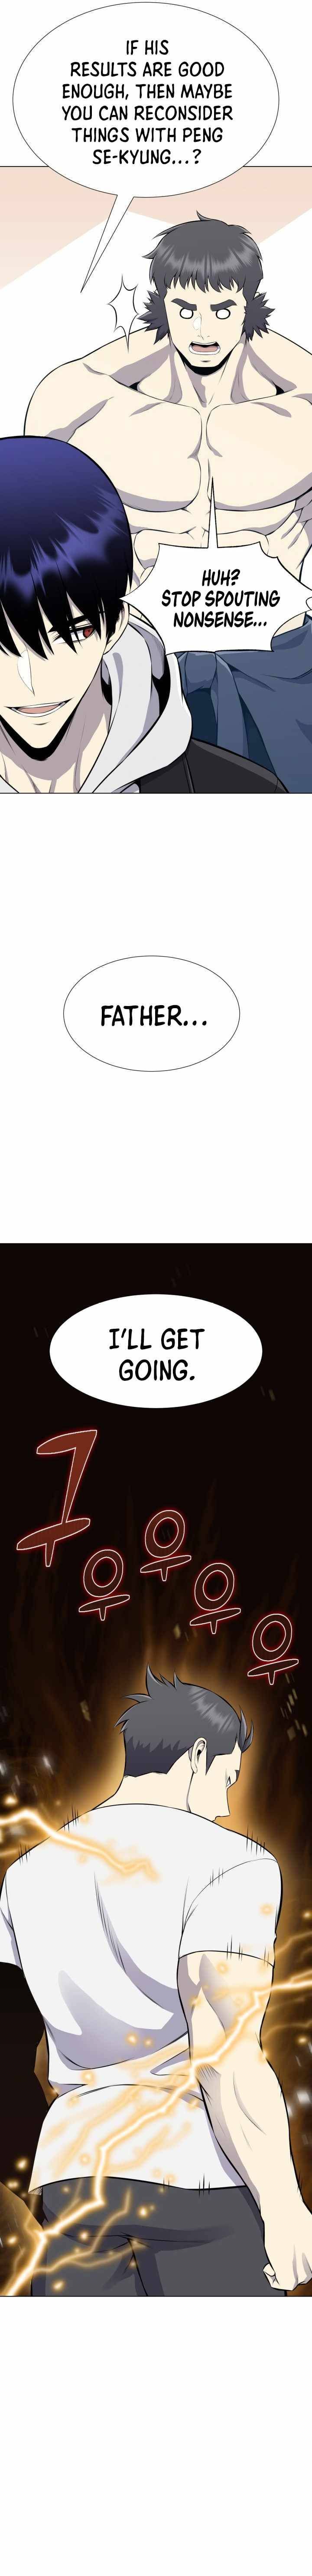 Reverse Villain Chapter 91 Page 7